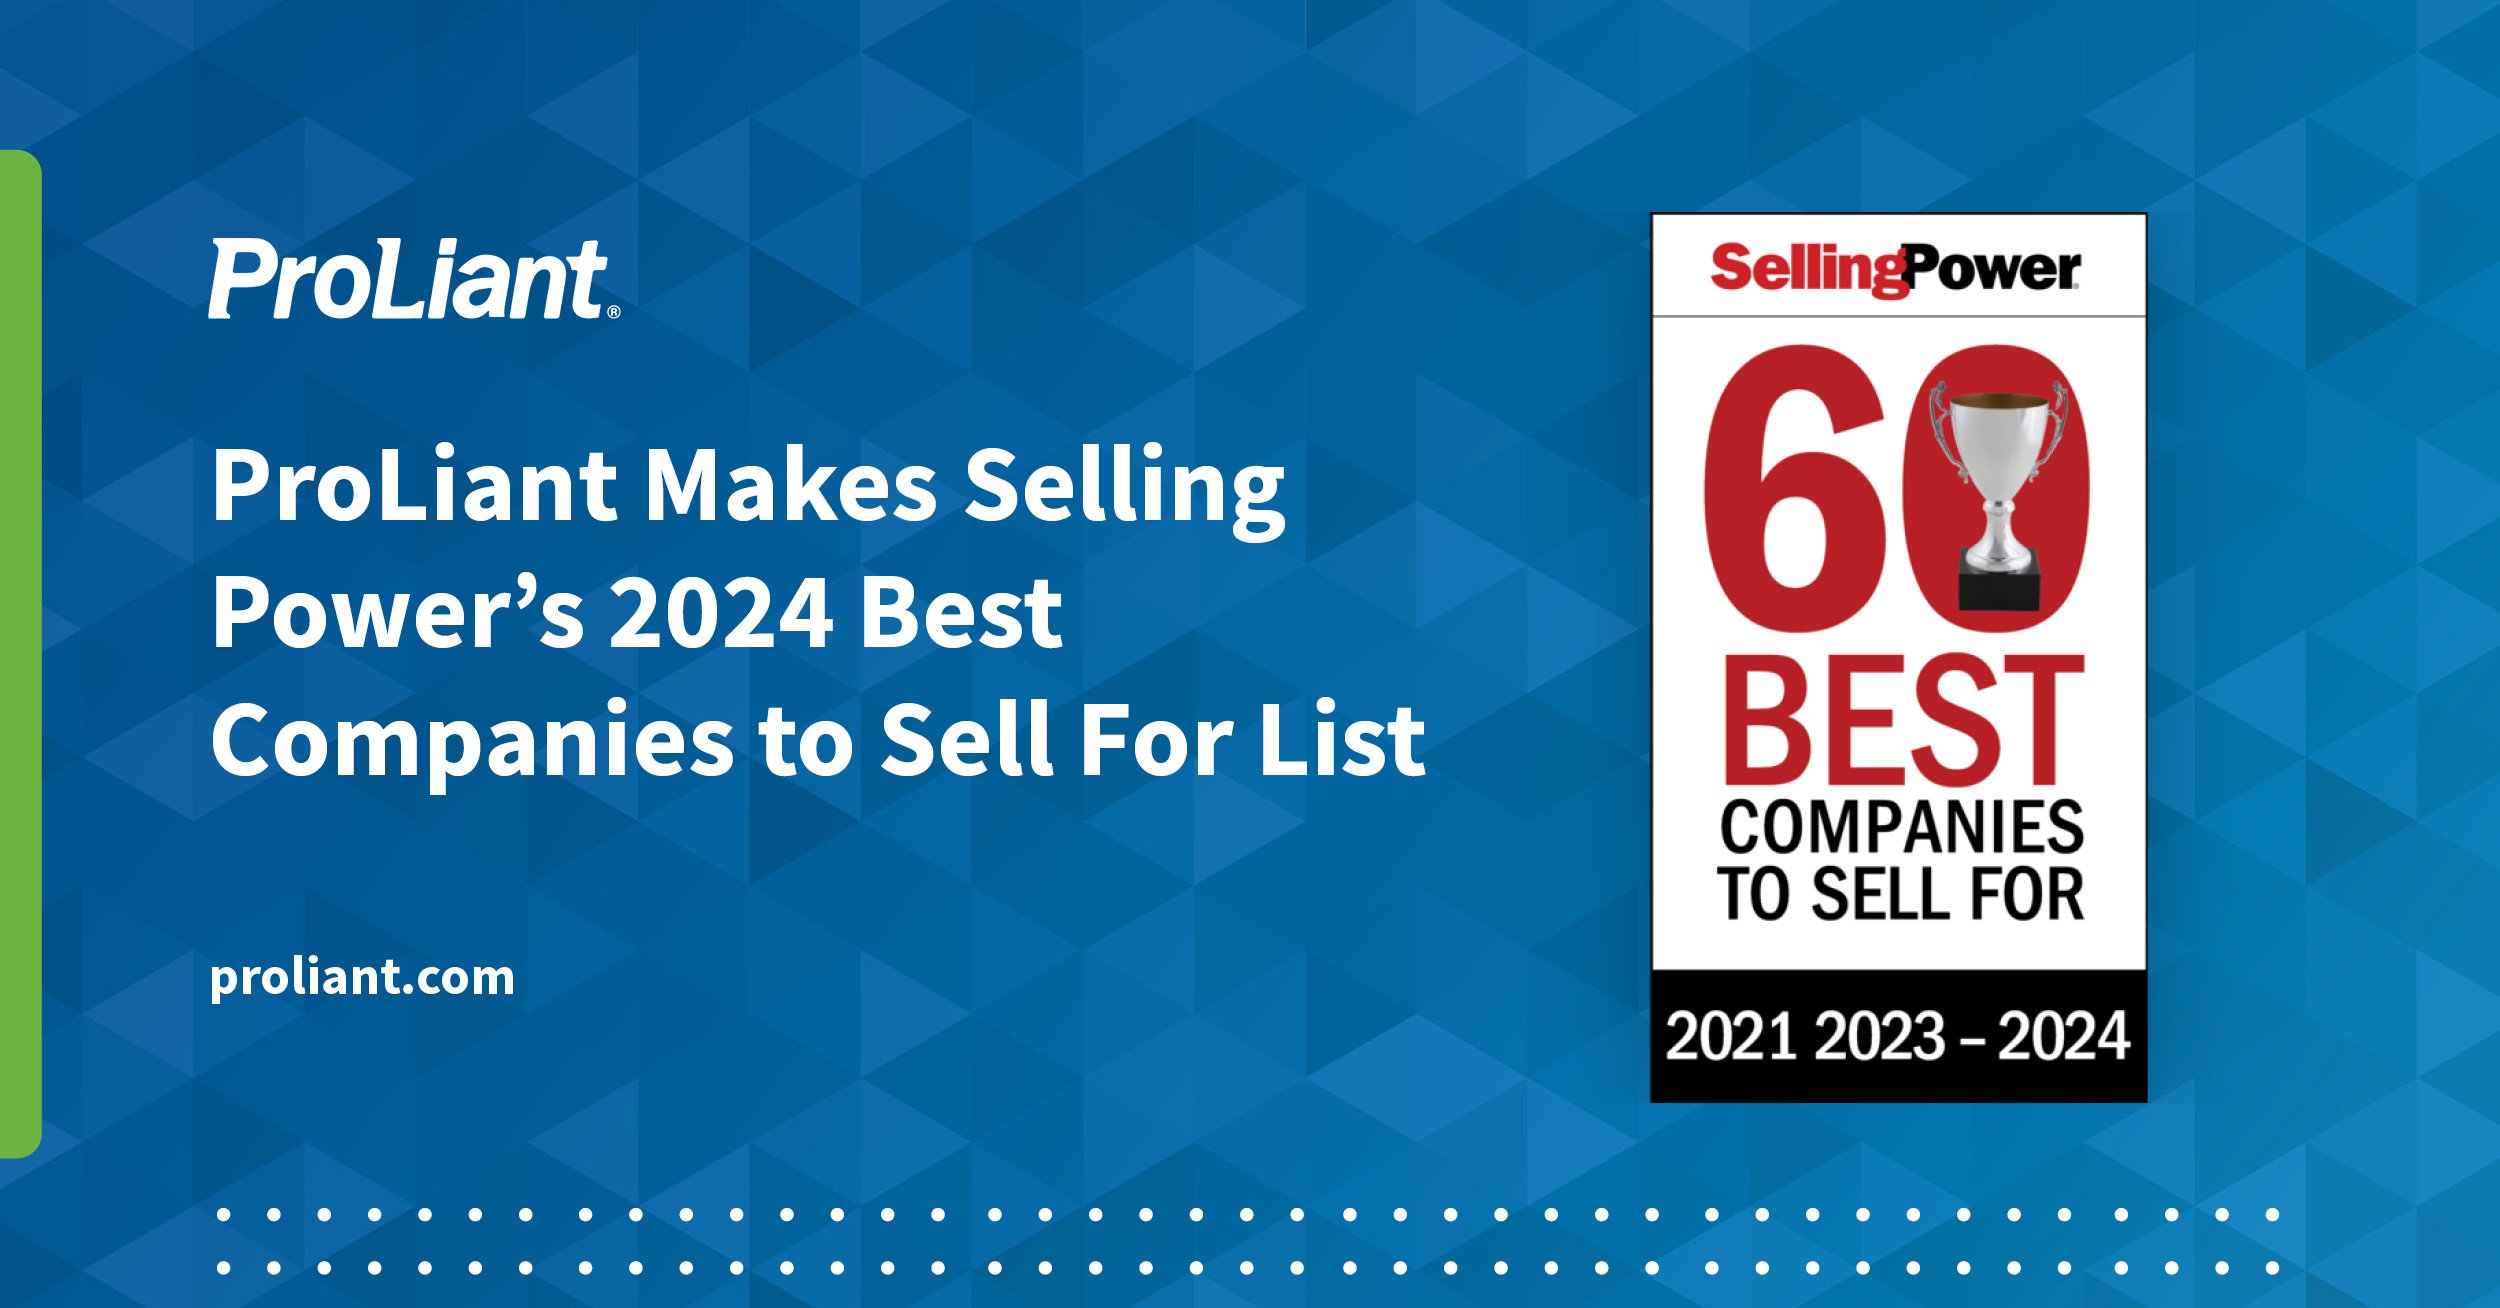 ProLiant Makes Selling Power’s 2024 Best Companies to Sell For List